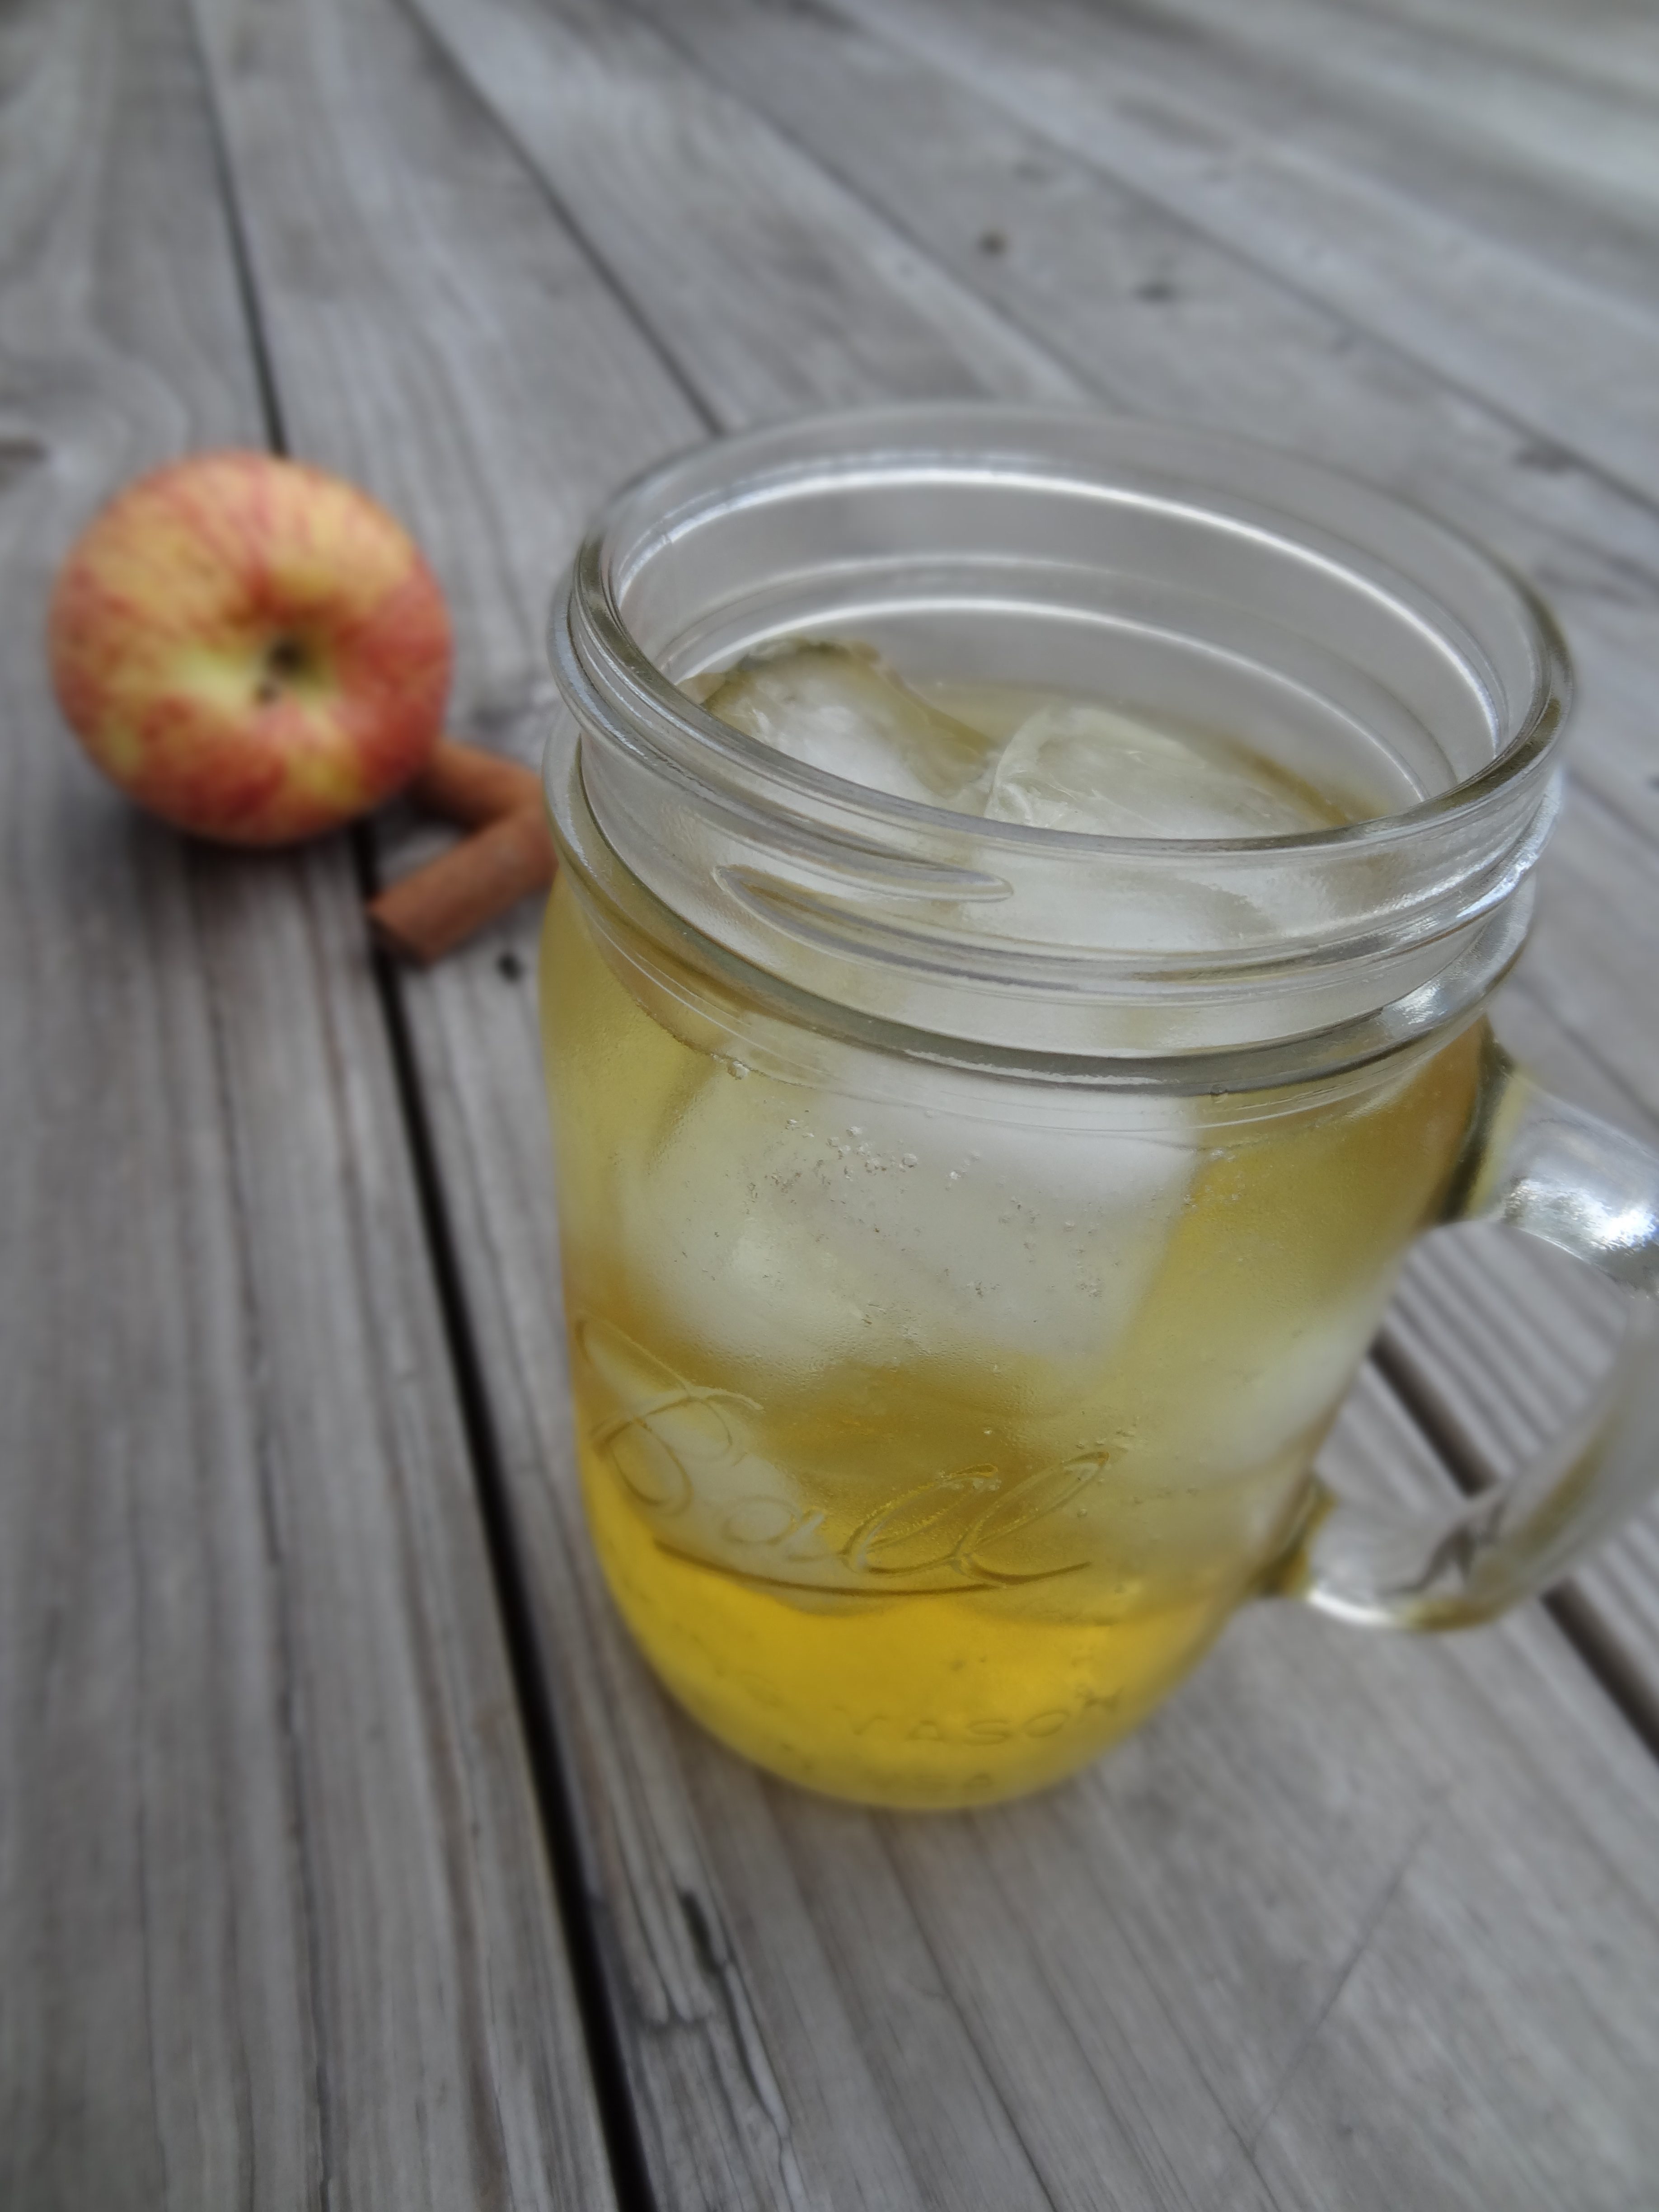 Welcome autumn with these delicious Sparkling Apple Cider Recipes - click the link - http://wp.me/p5Jjr7-lR